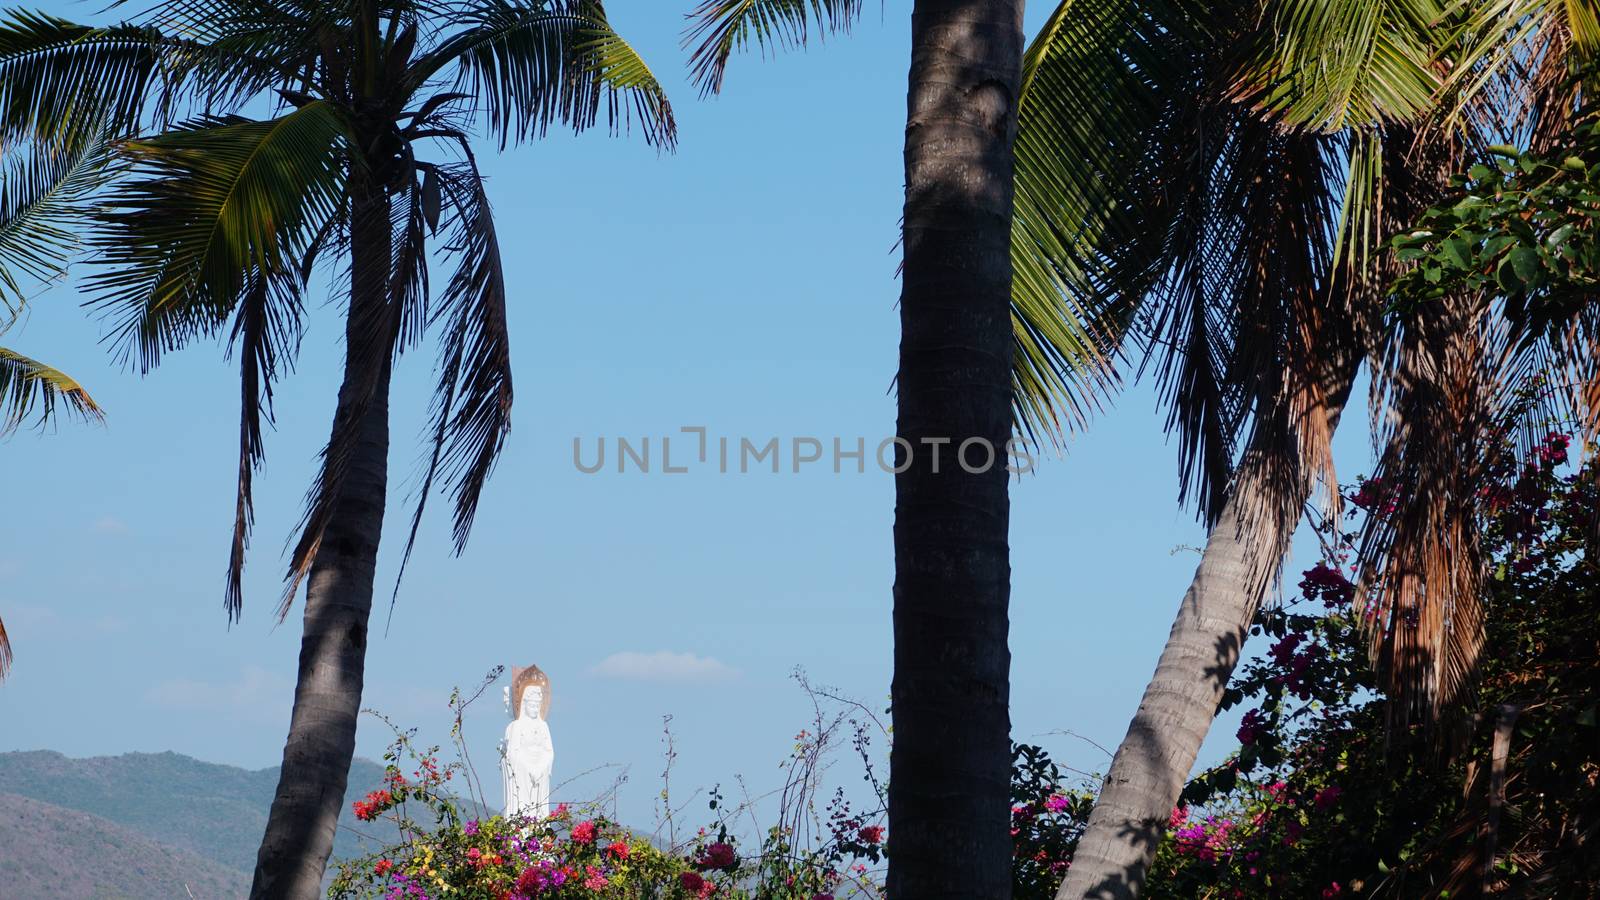 Sanya, Hainan, China - Landscape with tropical palm trees and Goddess of Mercy located in the sea against blue sky in Nanshan Buddhist Cultural Centre